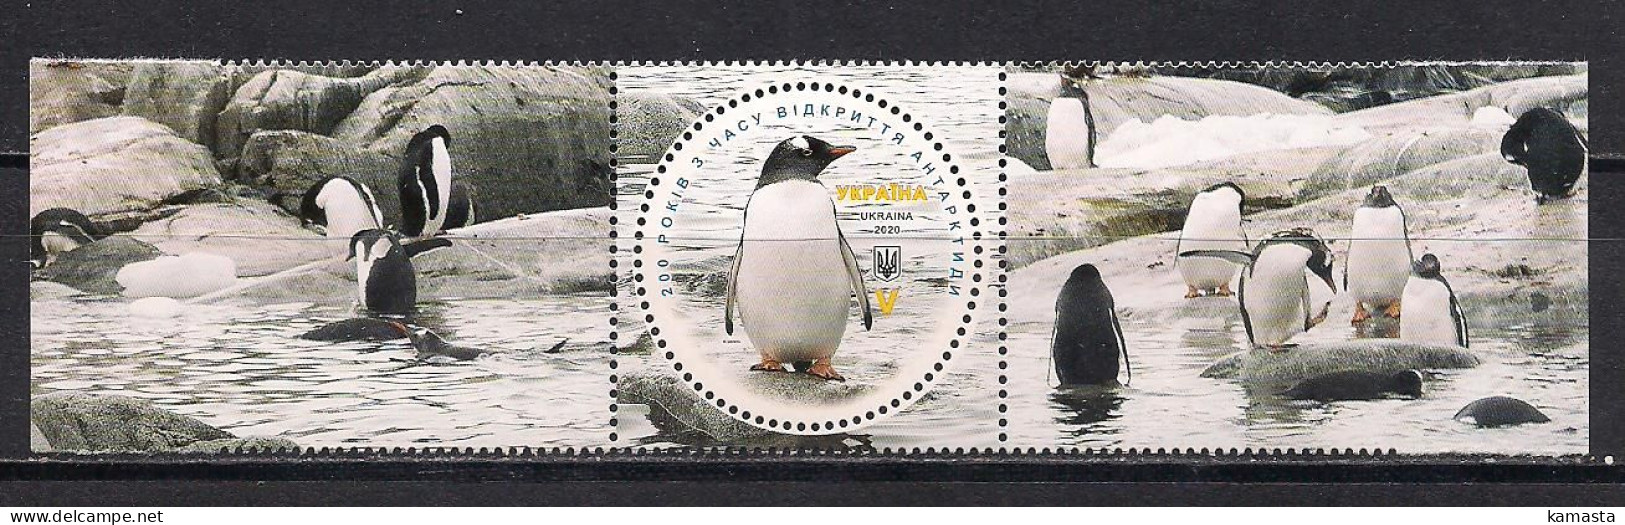 Ukraine 2020 Bicentenary Of The Discovery Of Antarctica. Penguins. Stamp Wit Labels. Mi 1857 - Penguins